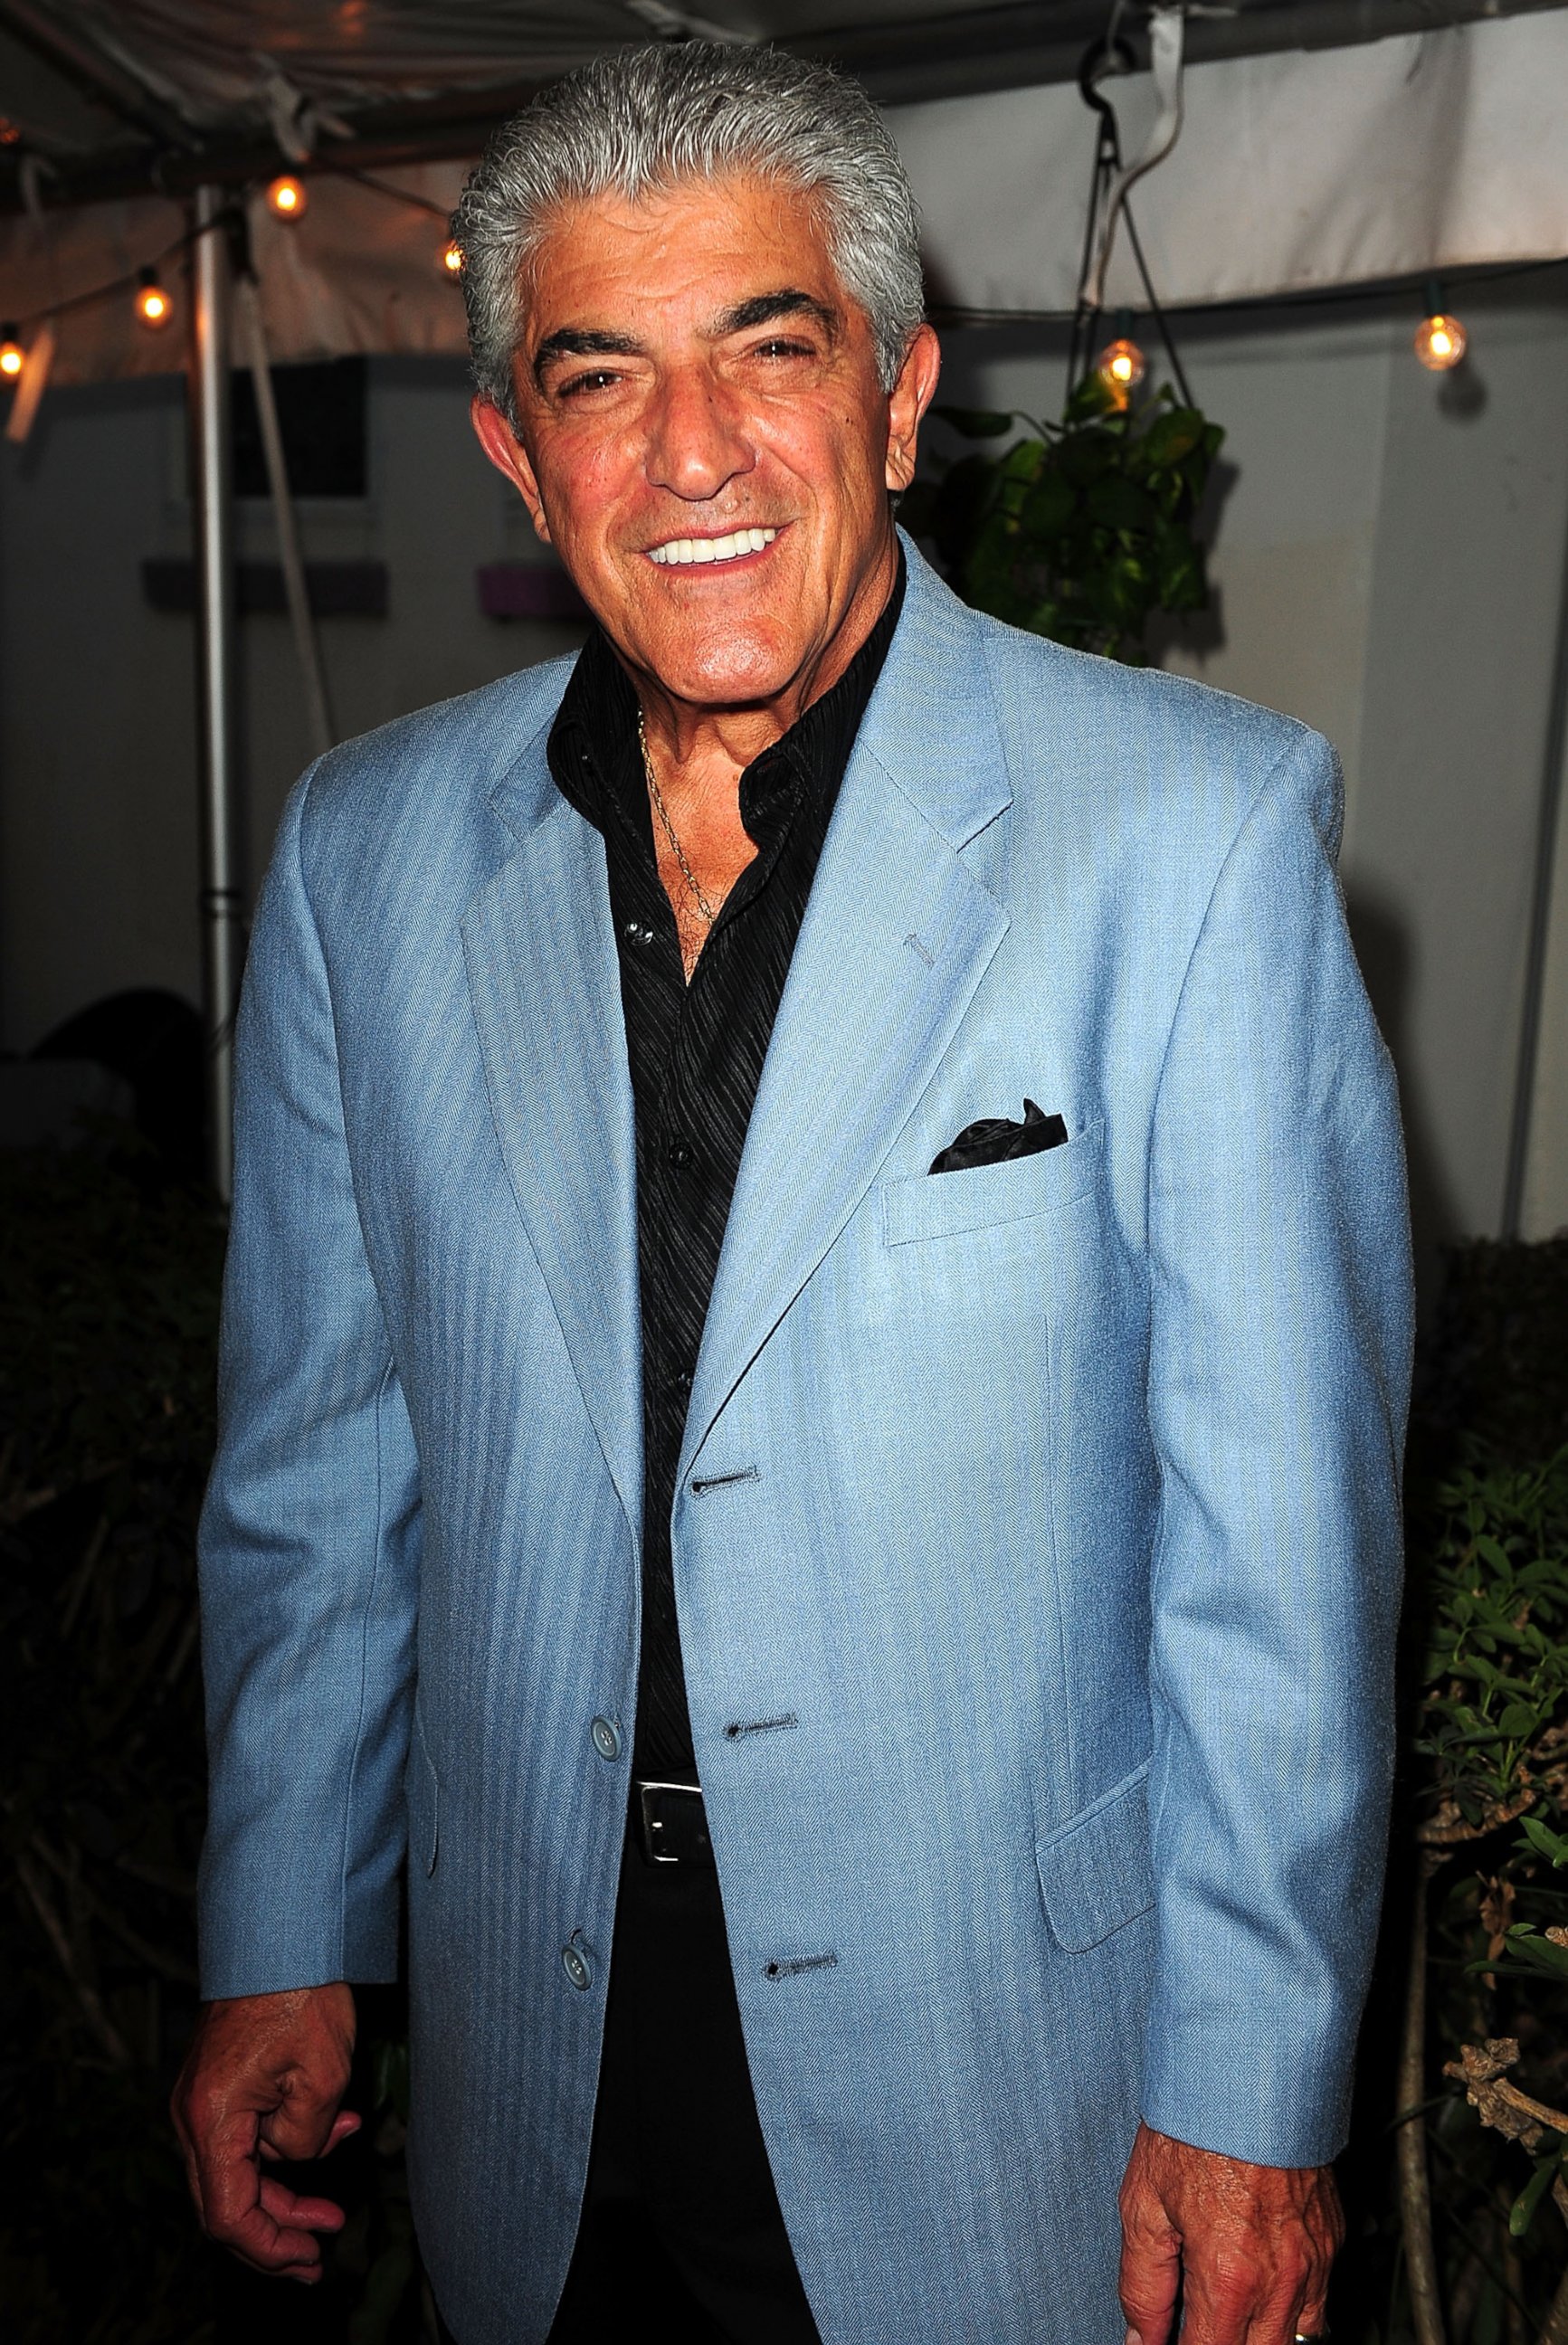 PHOTO: Actor Frank Vincent attends the Genius On Hold premiere at Cinema Paradiso, Jan. 8, 2011, in Fort Lauderdale, Fla.